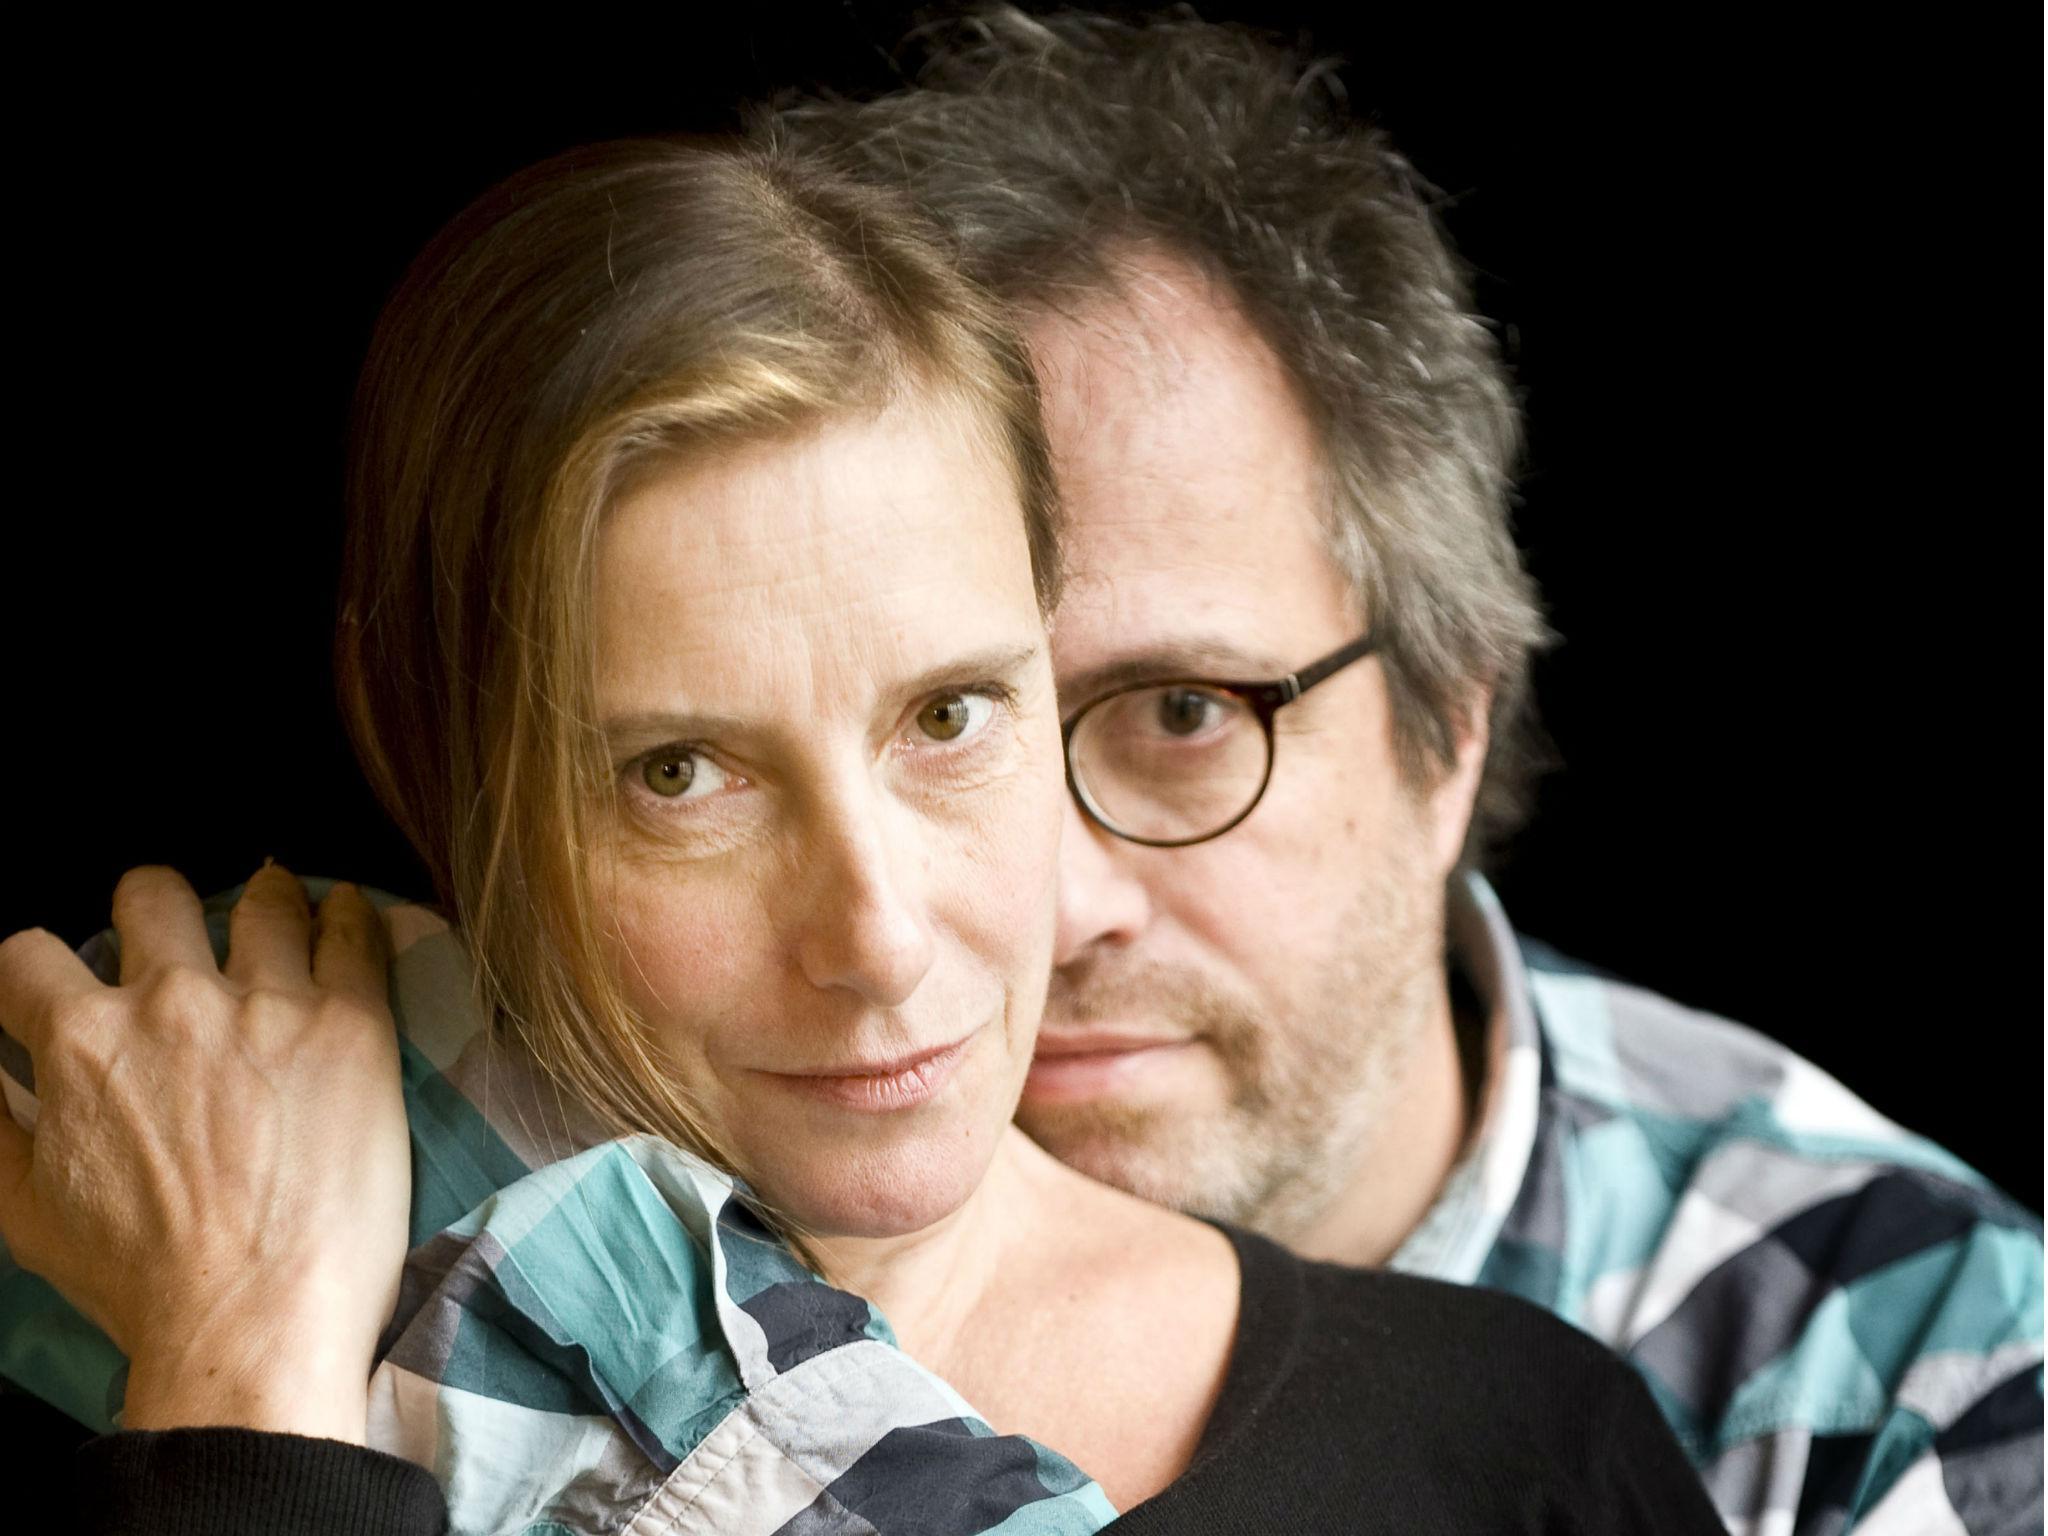 The production was conceived by Michèle Anne De Mey and her partner Jaco Van Dormael